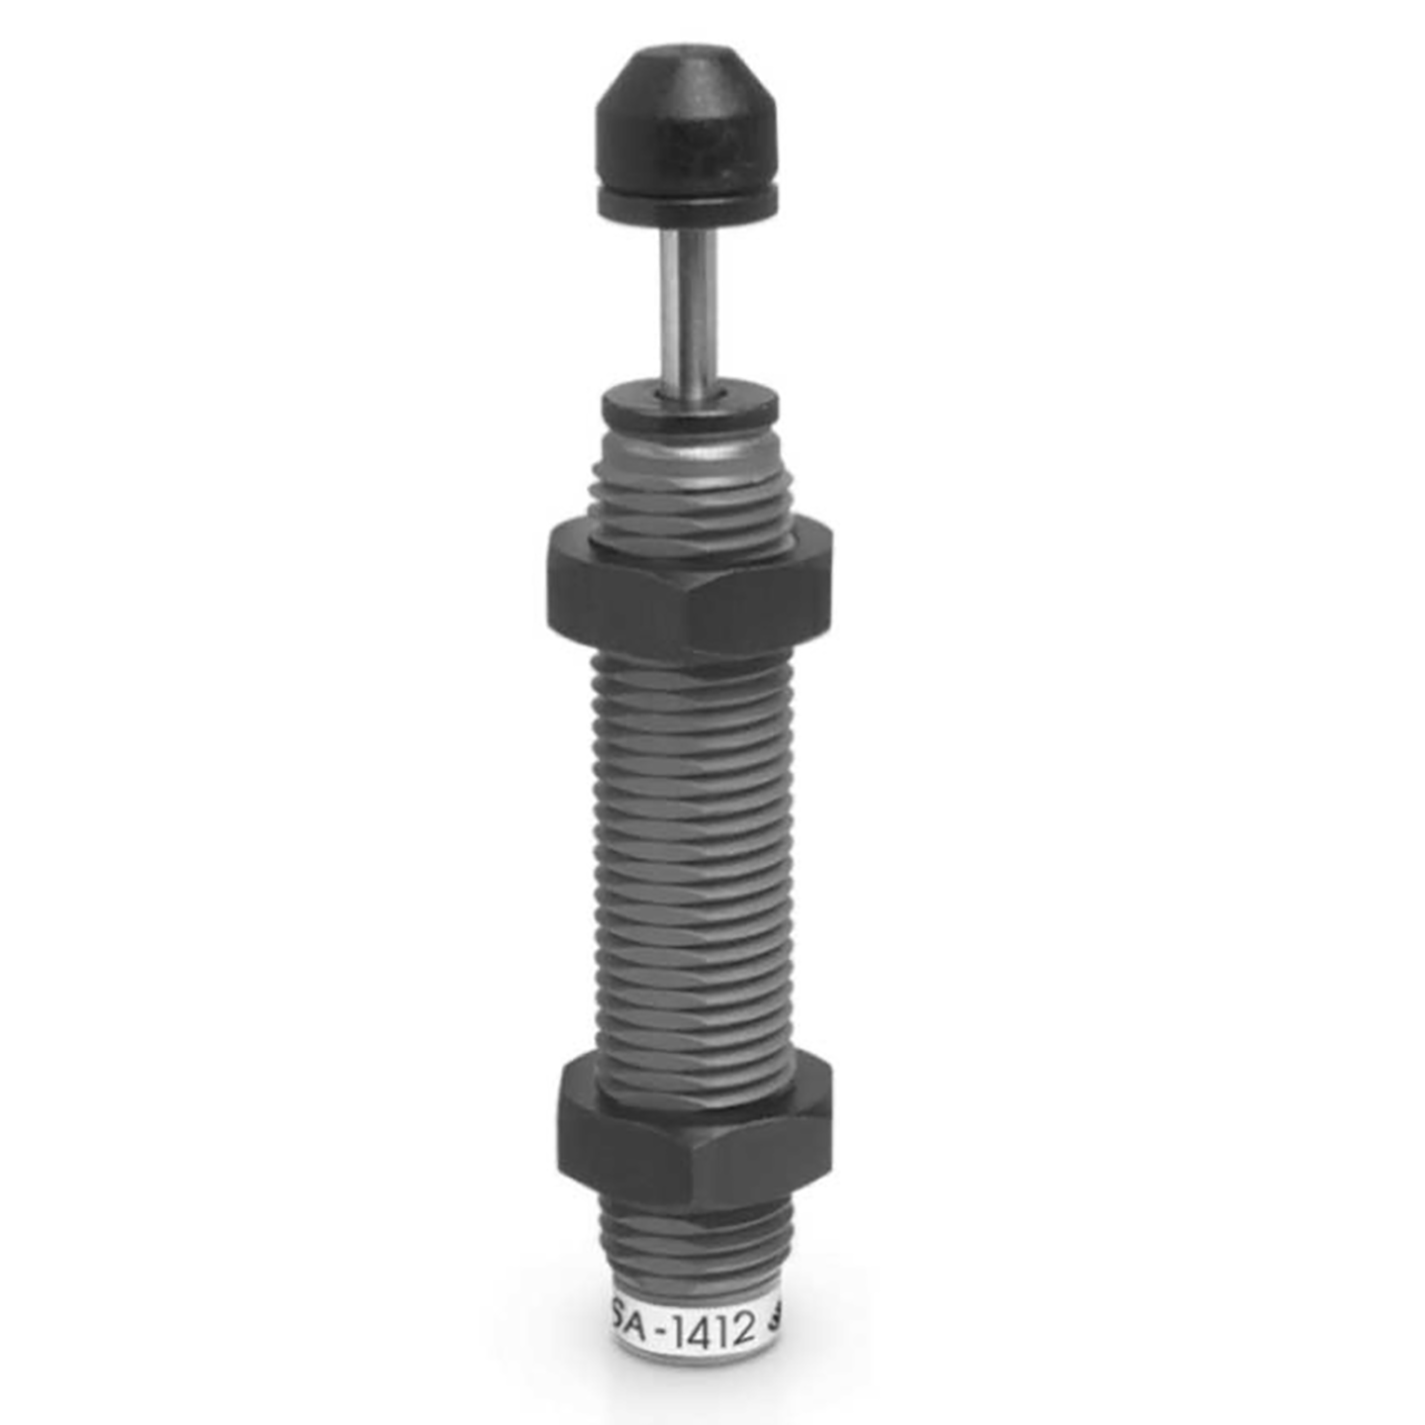 SHOCK ABSORBER SIZE M20X1.5 ST 15MM